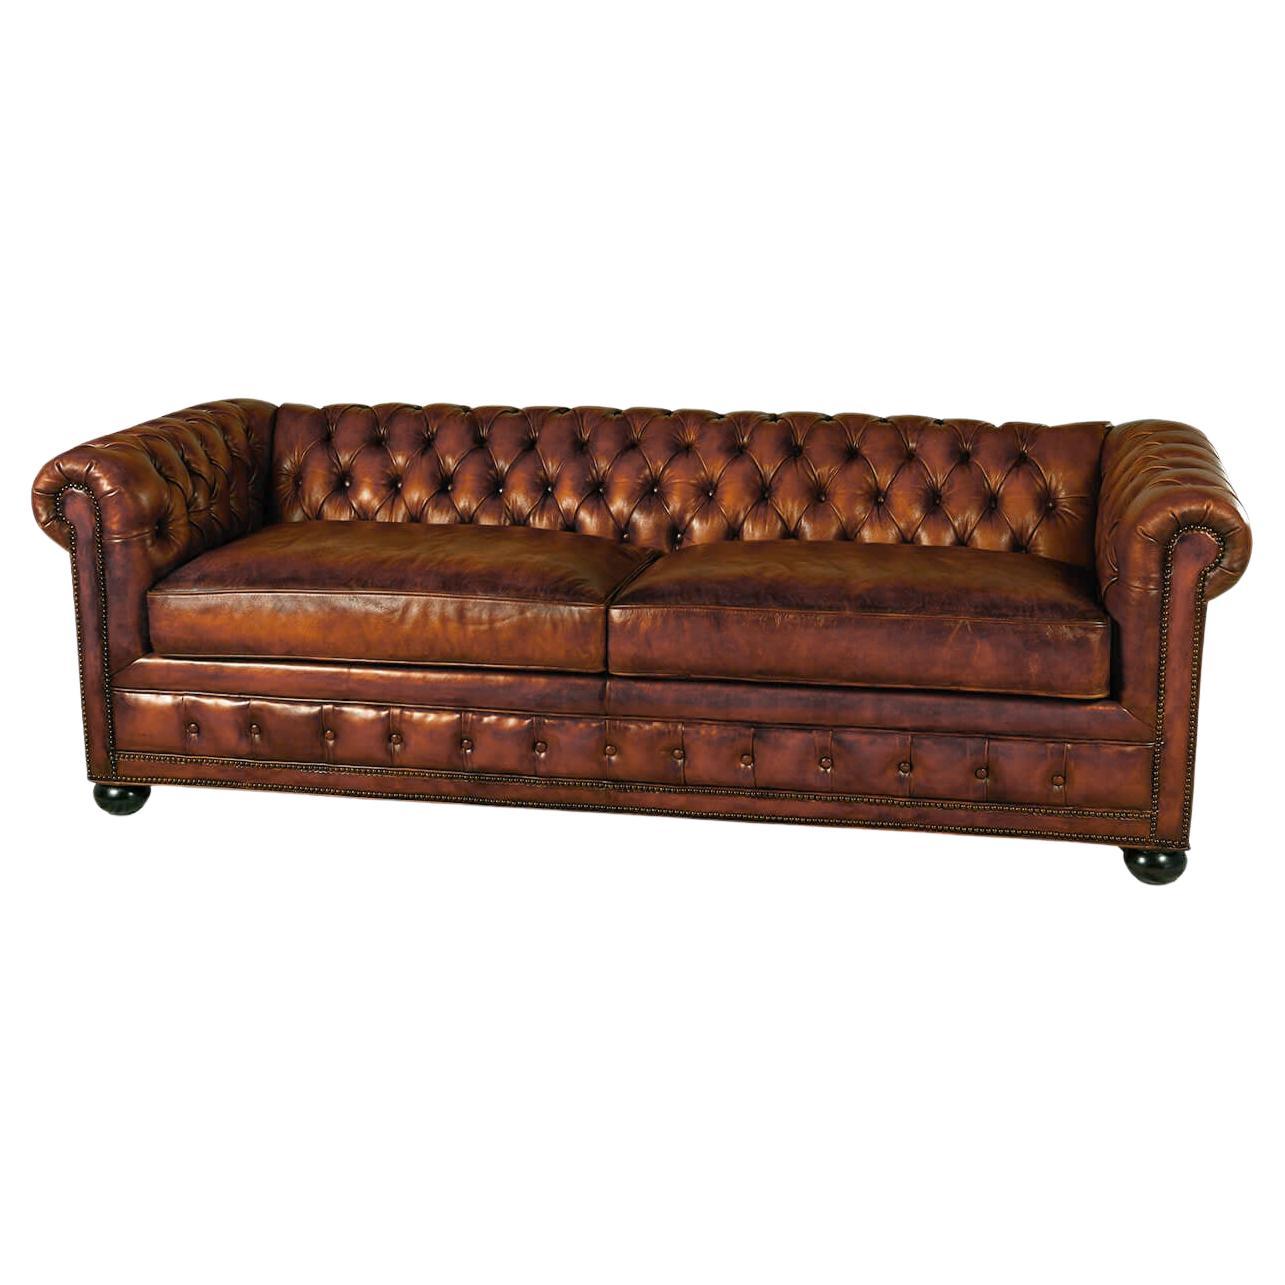 Antiqued Chesterfield Leather Sofa For Sale